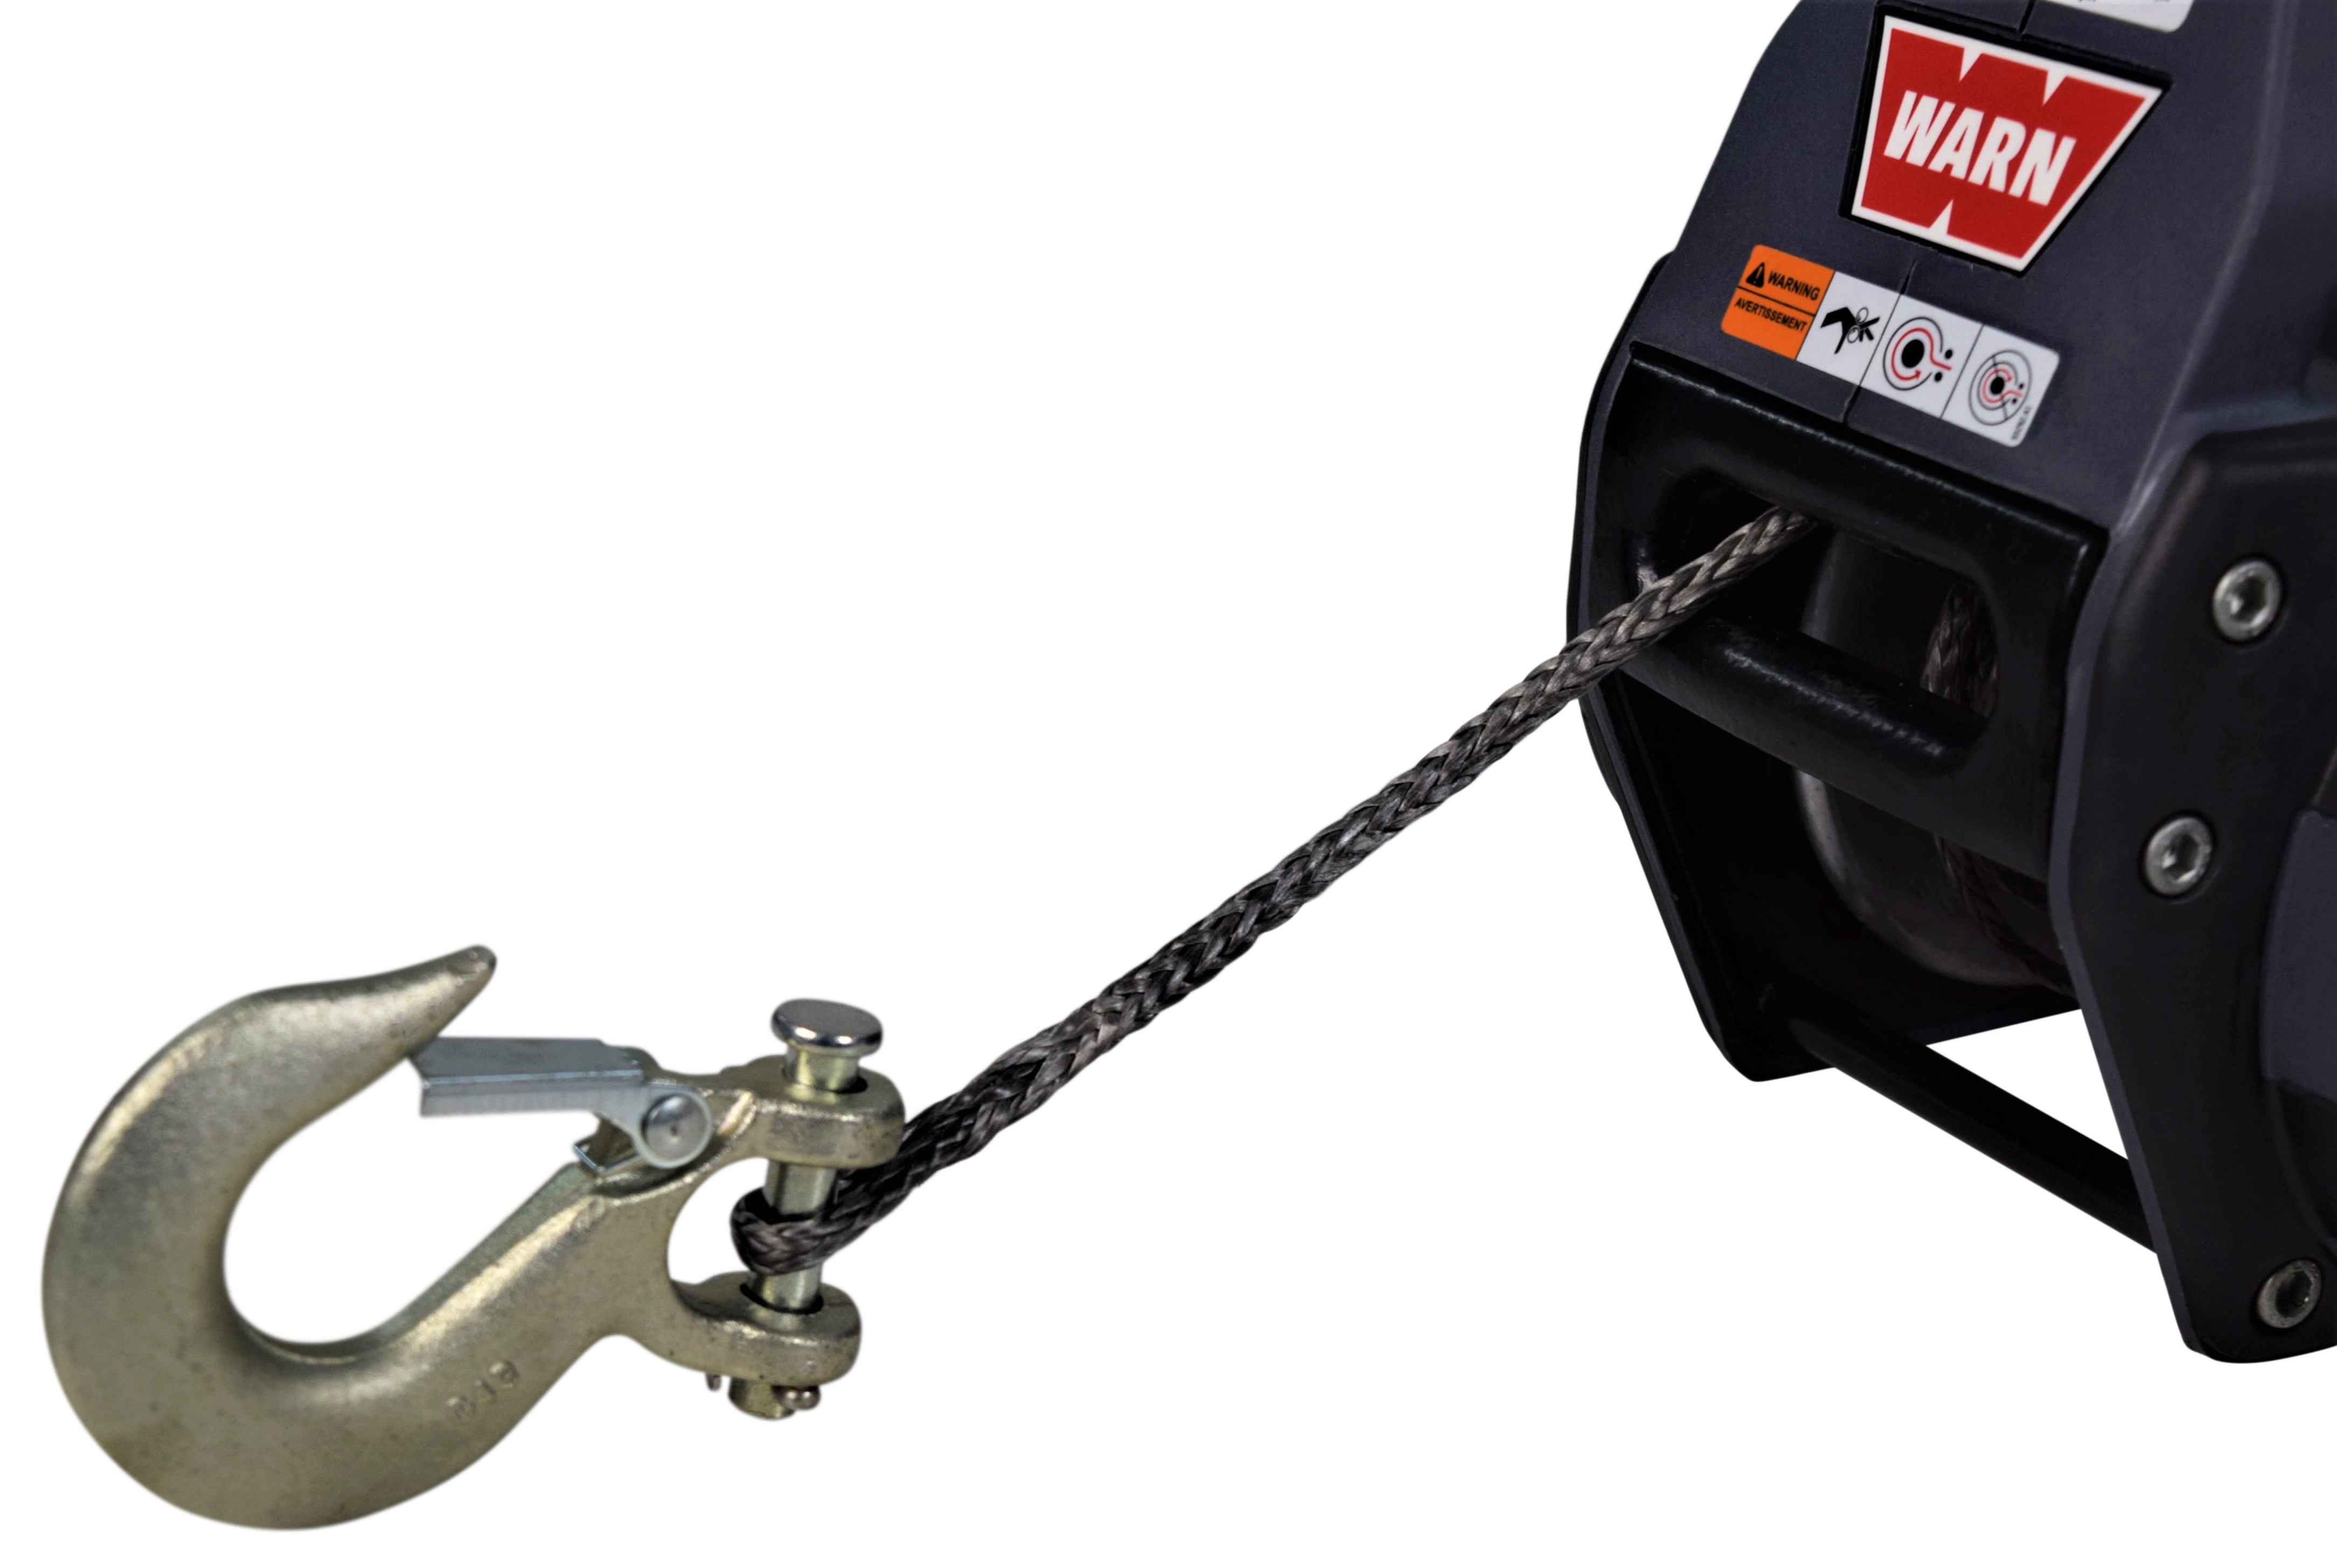 Warn-101575-Drill-Winch-750-lbs-Capacity-40-Synthetic-Rope-Free-spool-Clutch-image-8